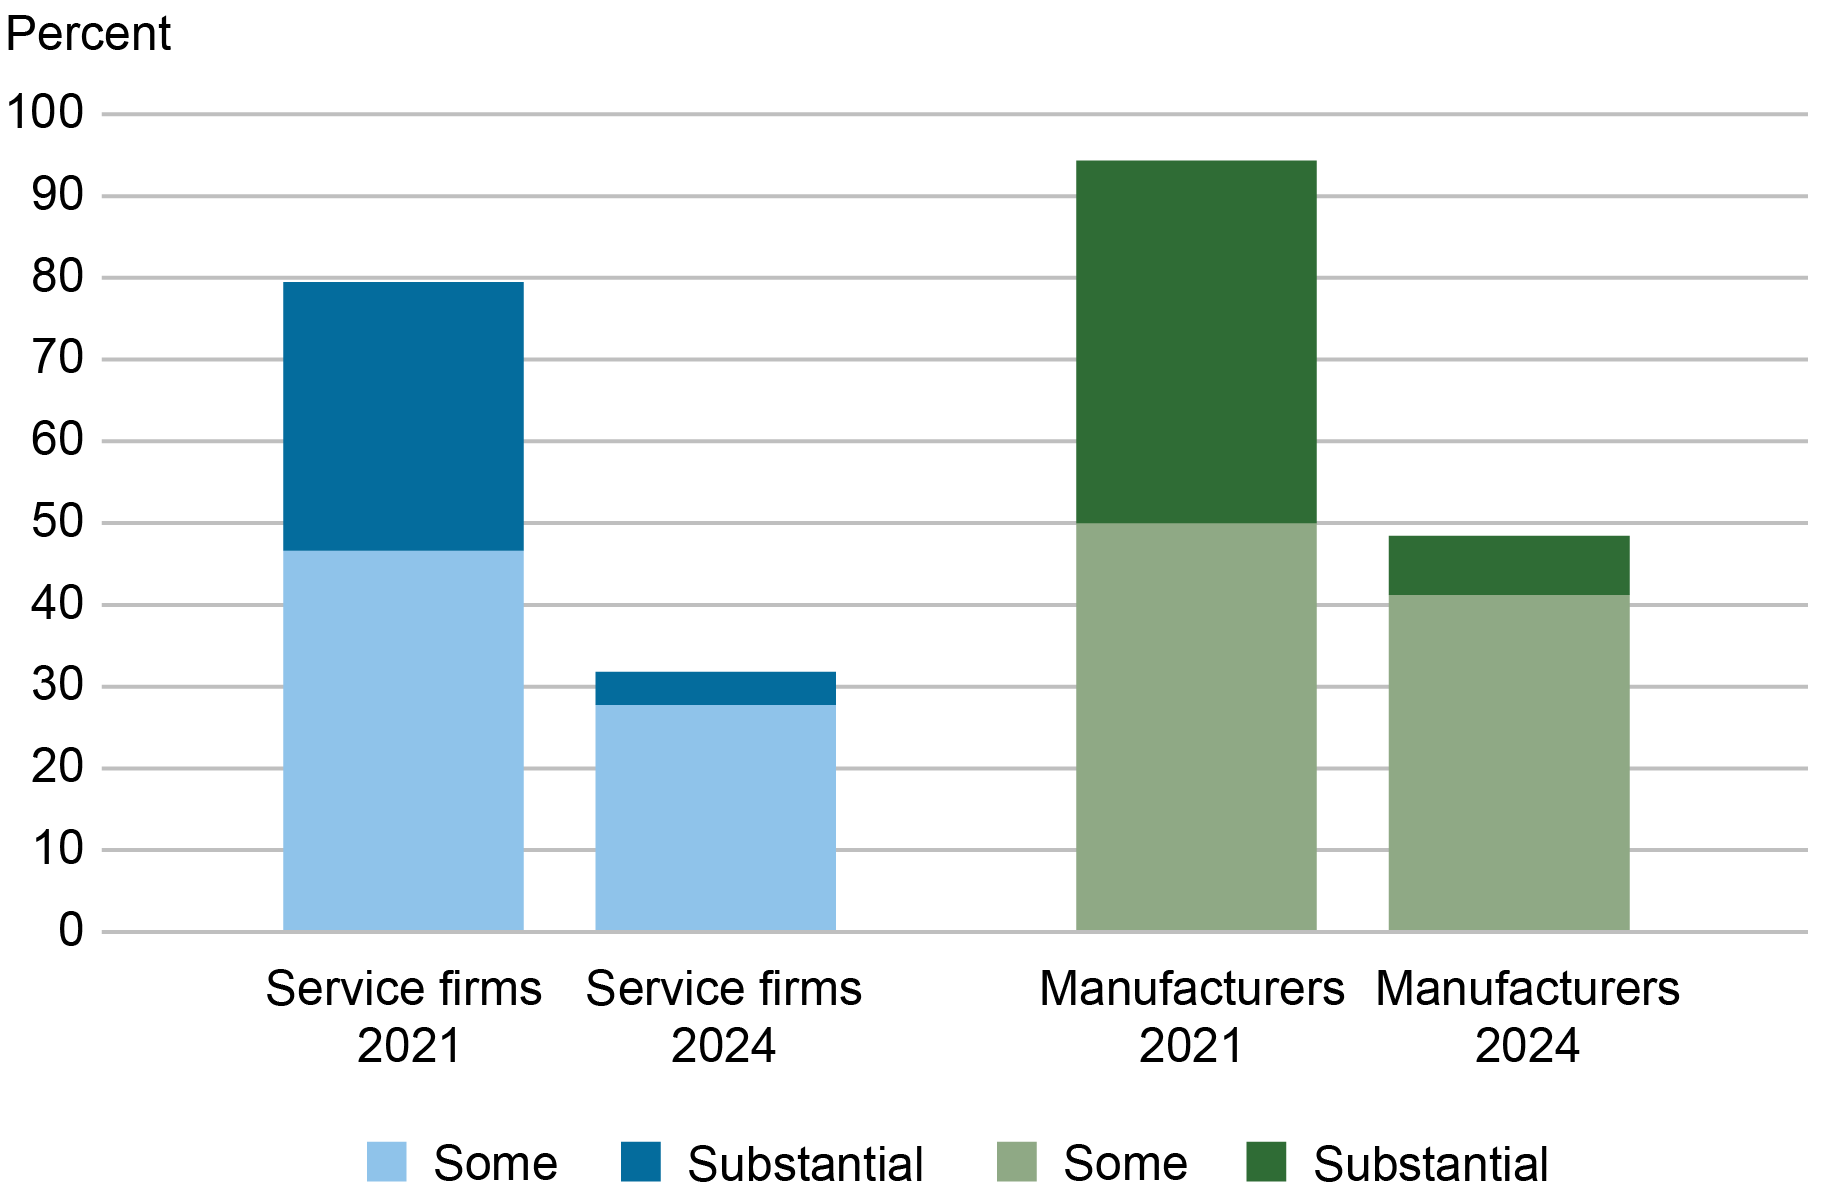 Alt=”bar chart comparing survey results from left (2021) to right (2024) to how significant supply chain disruptions were over the past month, by percentage; service firms: some disruption (light blue) and substantial disruption (dark blue); manufacturers: some disruption (light green) and substantial disruption (dark green)” 